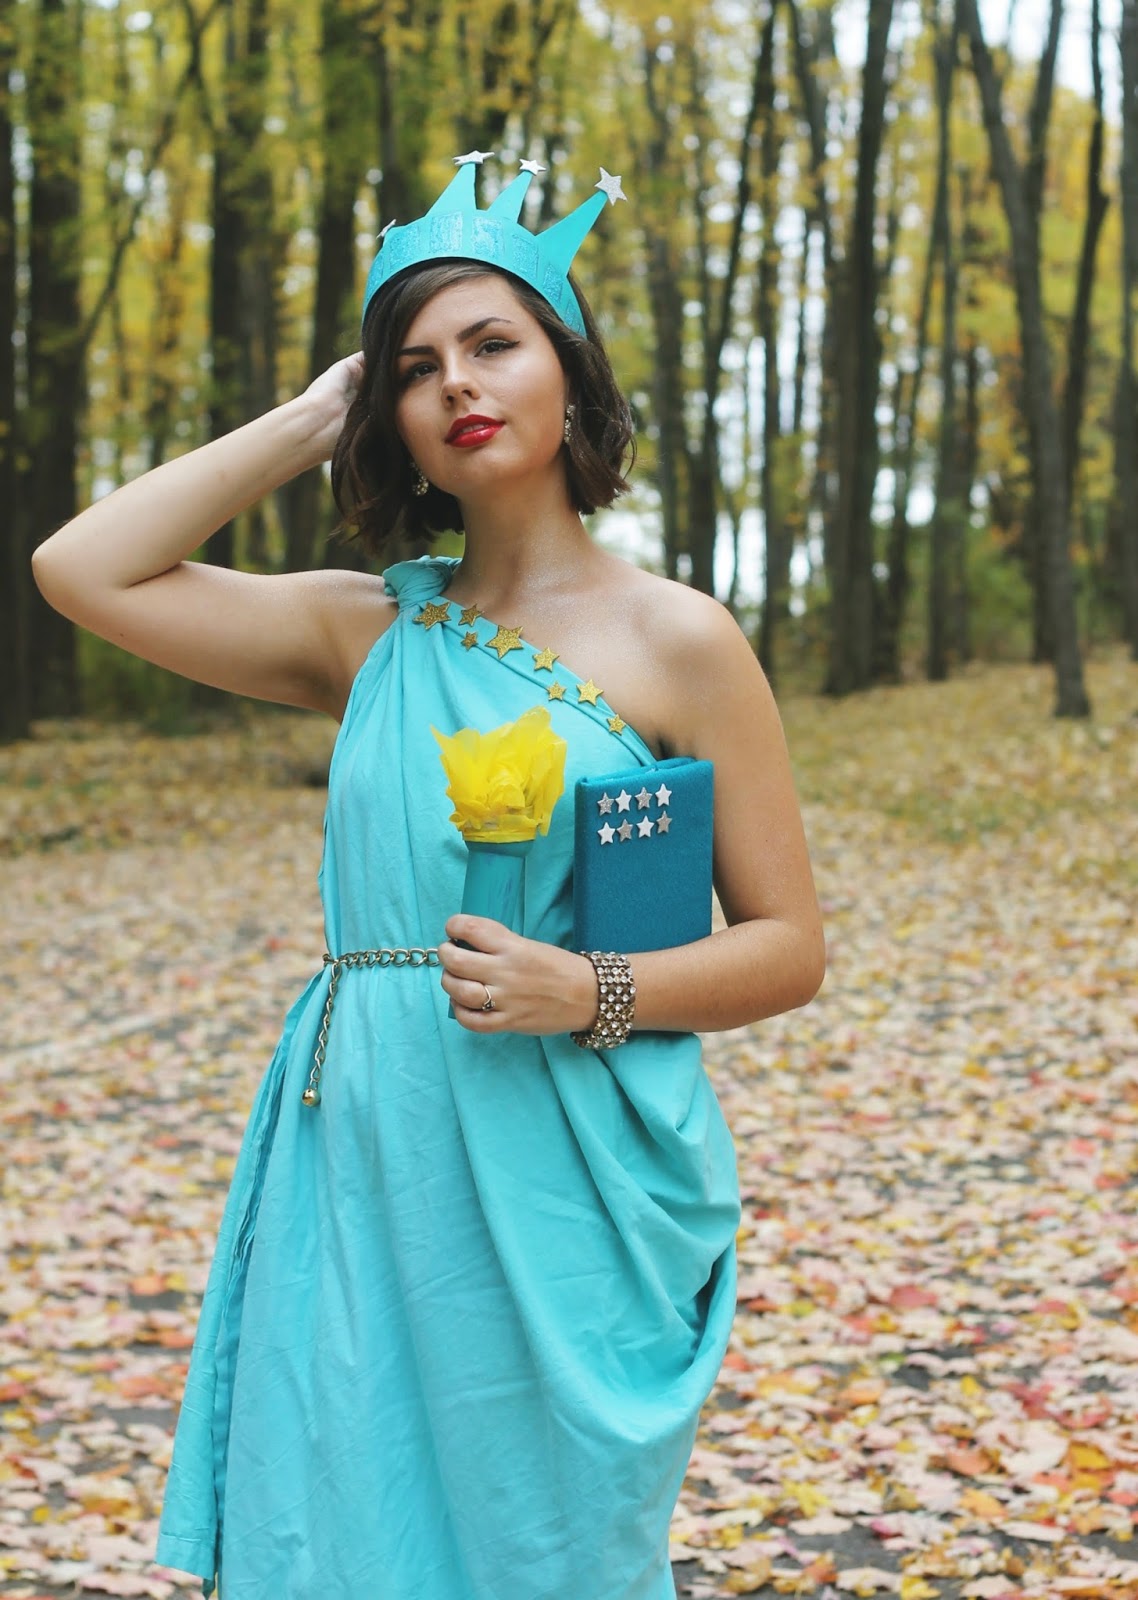 Halloween 2015: DIY Statue of Liberty Costume! | Passing Whimsies